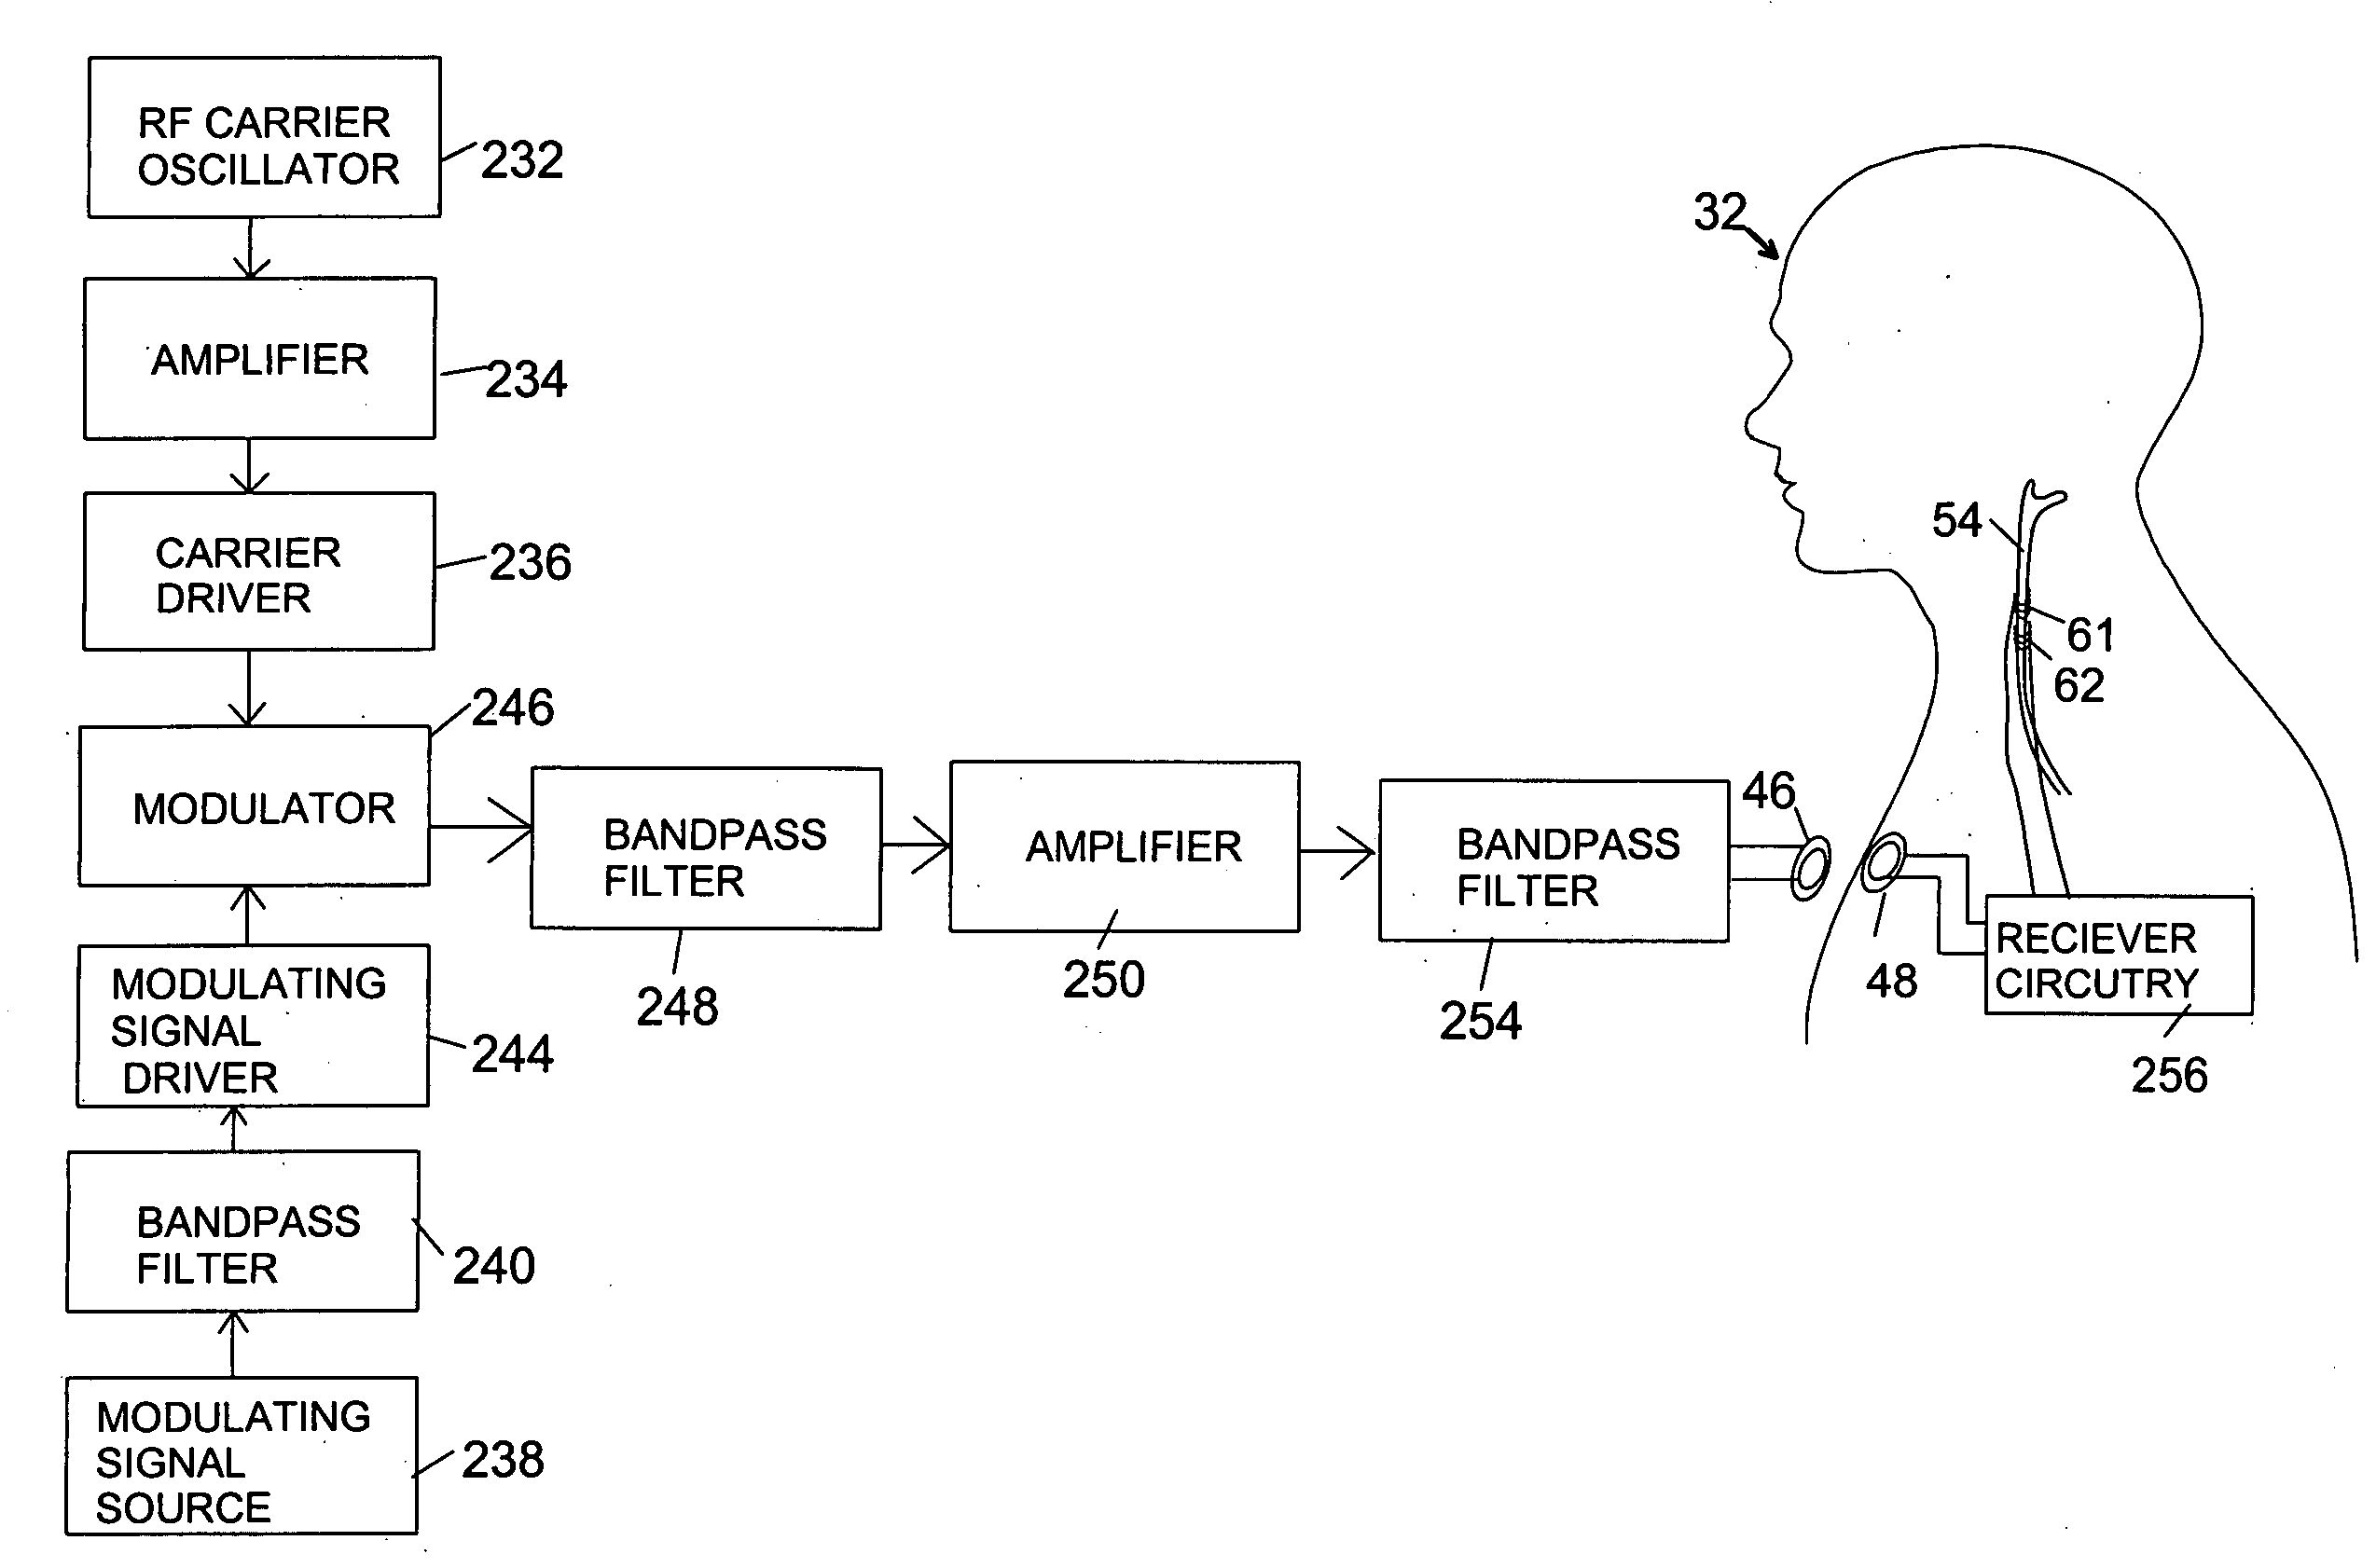 Method and system to provide therapy or alleviate symptoms of involuntary movement disorders by providing complex and/or rectangular electrical pulses to vagus nerve(s)